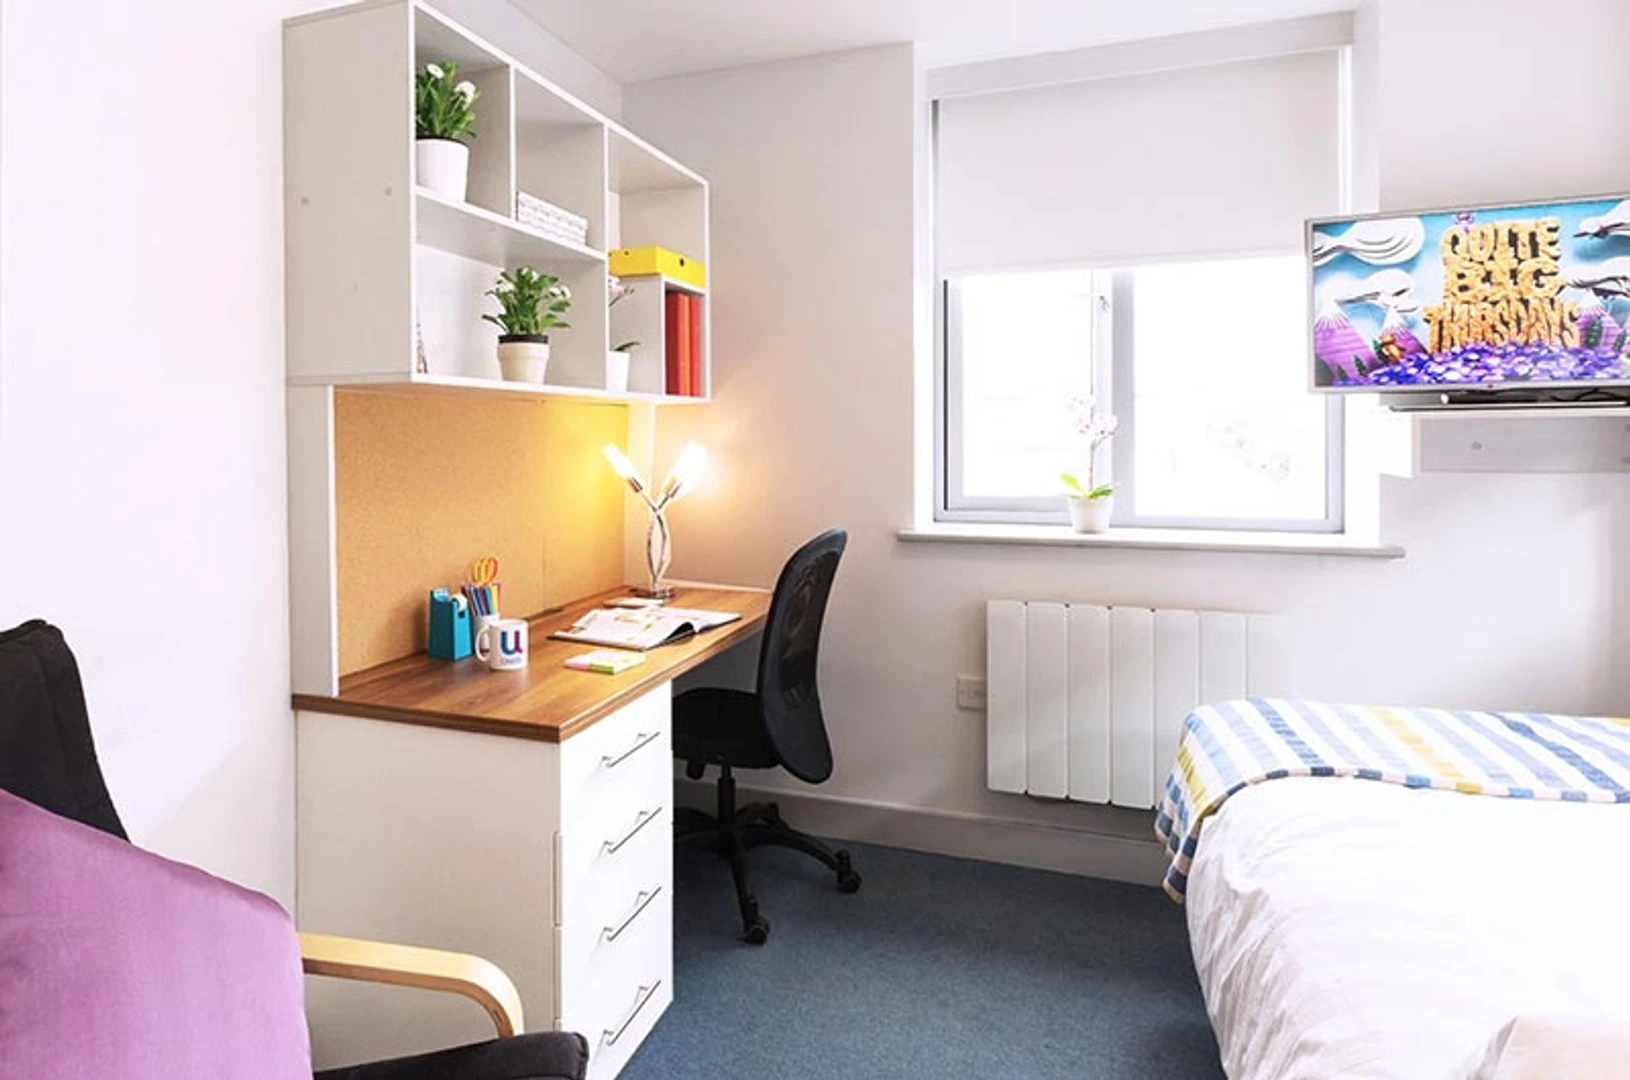 Renting rooms by the month in Southampton